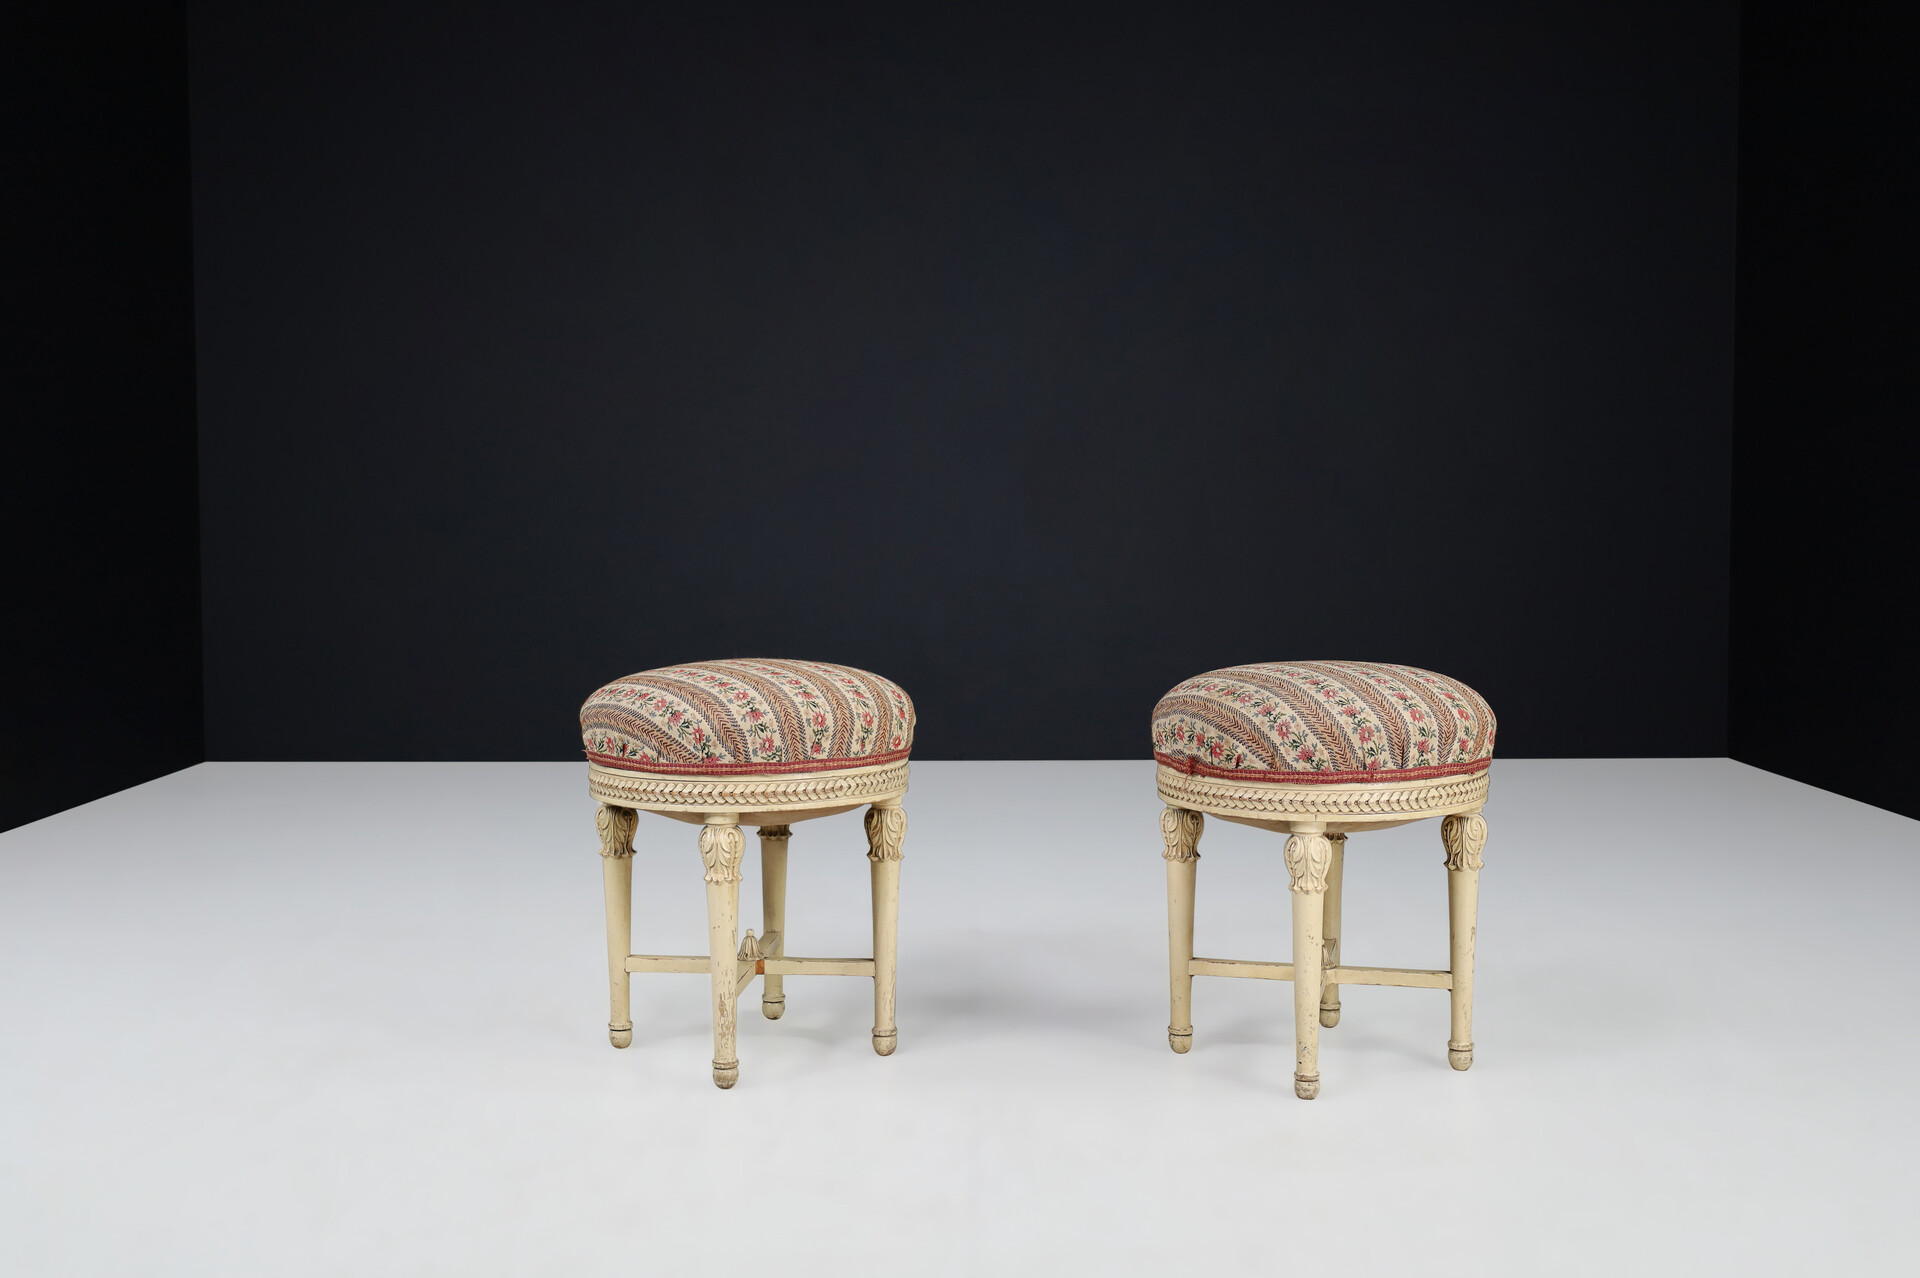 Antique Painted wood and upholstery stools, Vienna 1920s 20th century